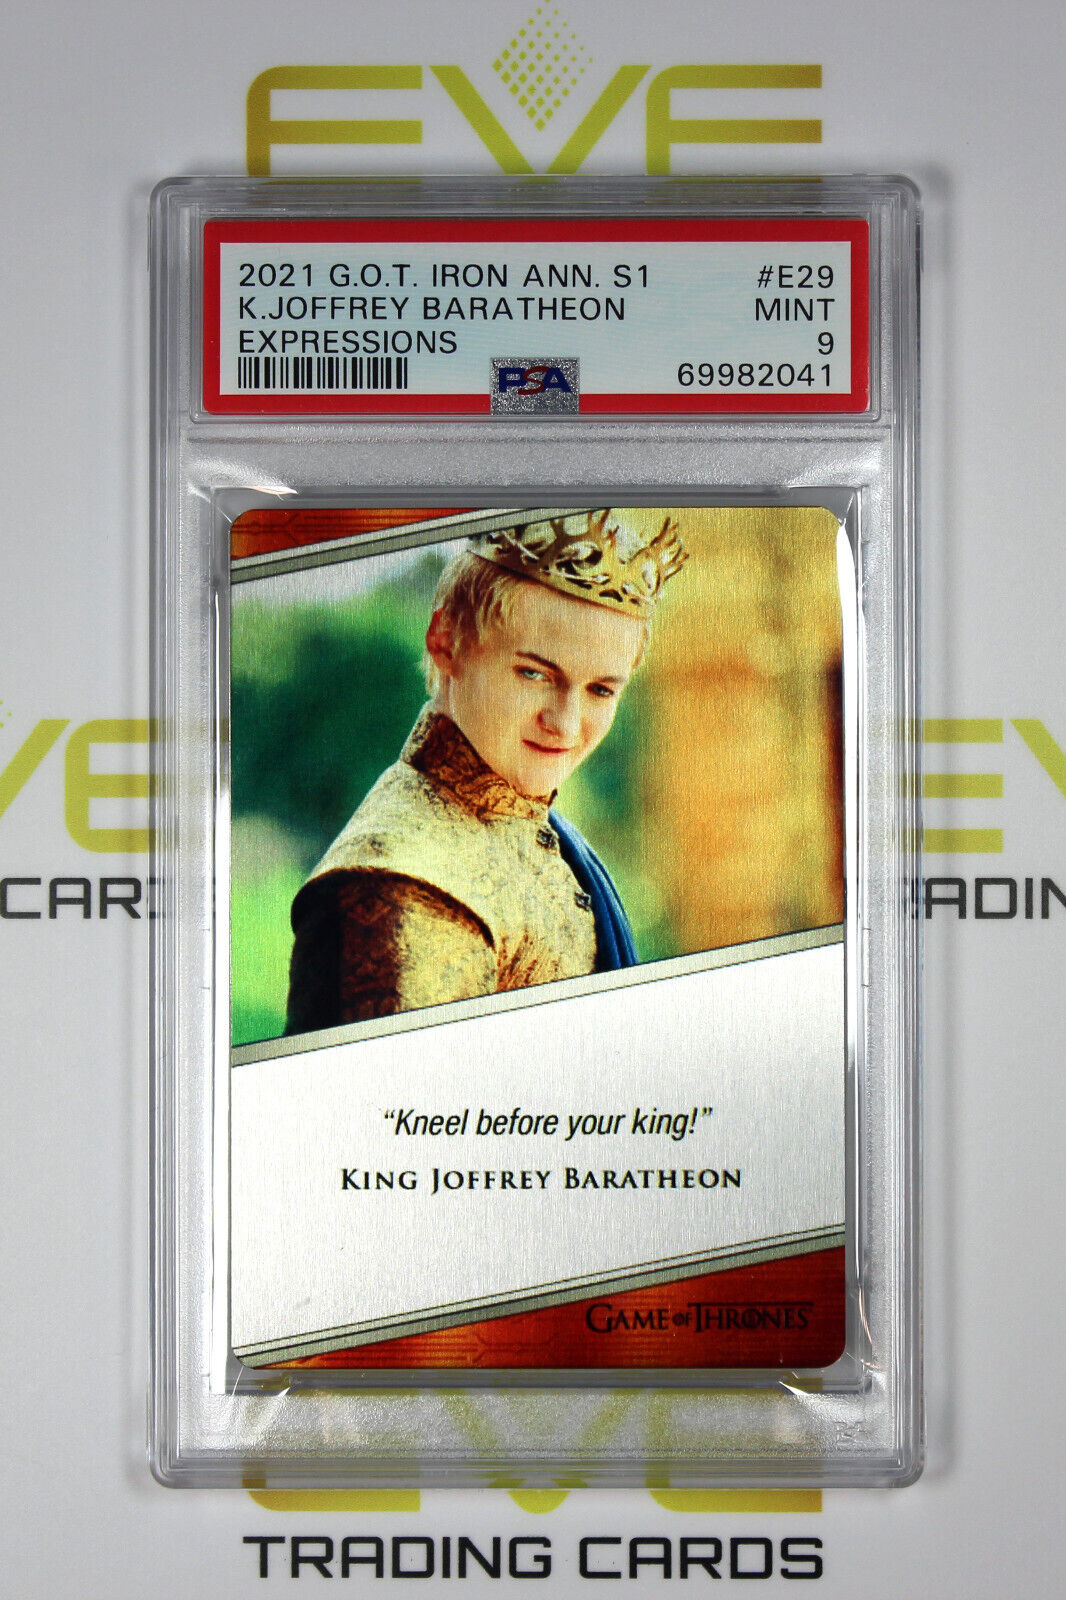 Graded Game of Thrones Card - #E29 2021 King Joffrey Baratheon Expressions PSA 9